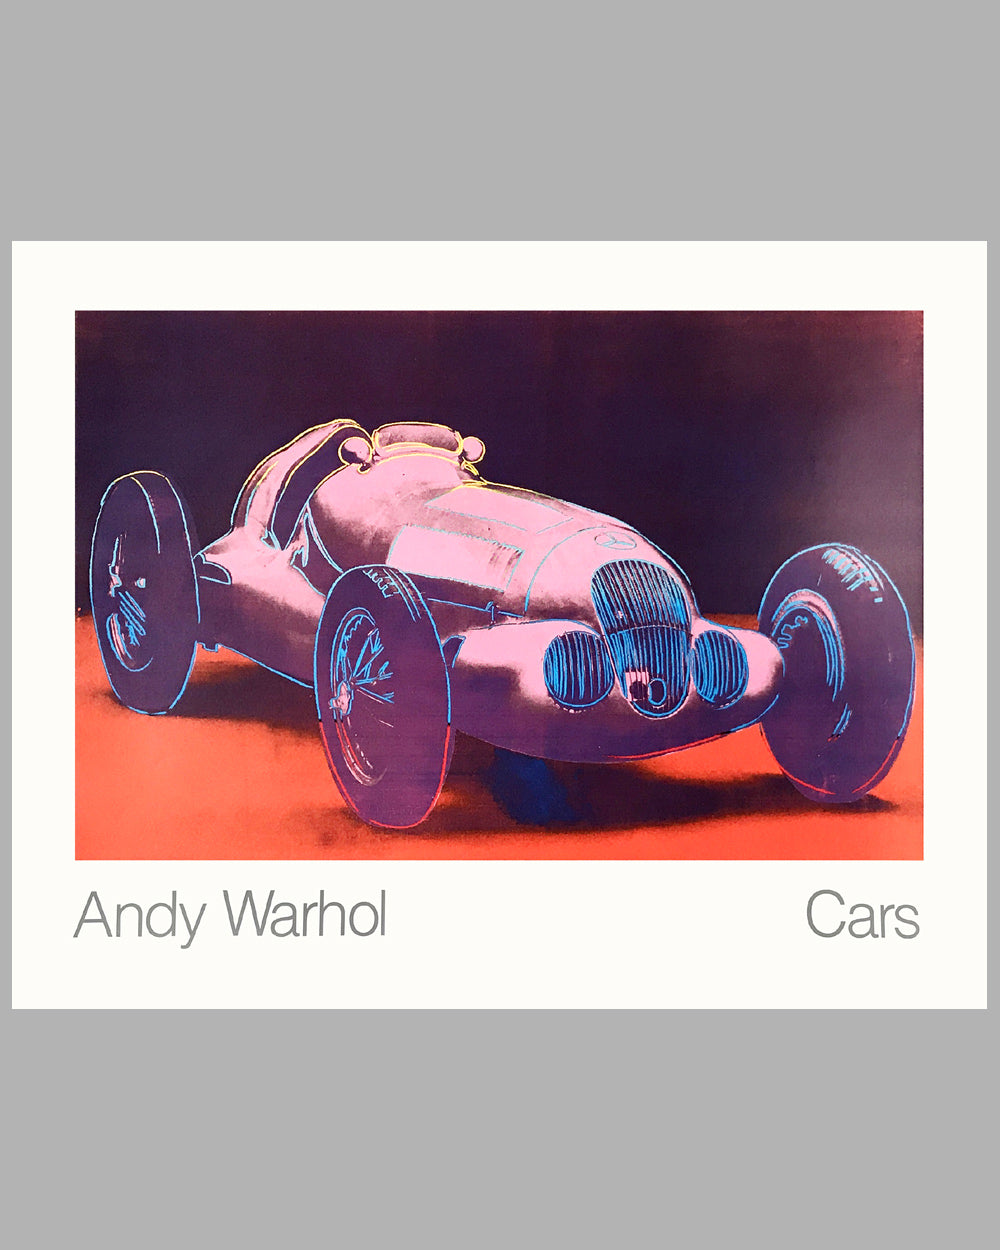 Cars by Andy Warhol - Mercedes Benz W125 GP Poster